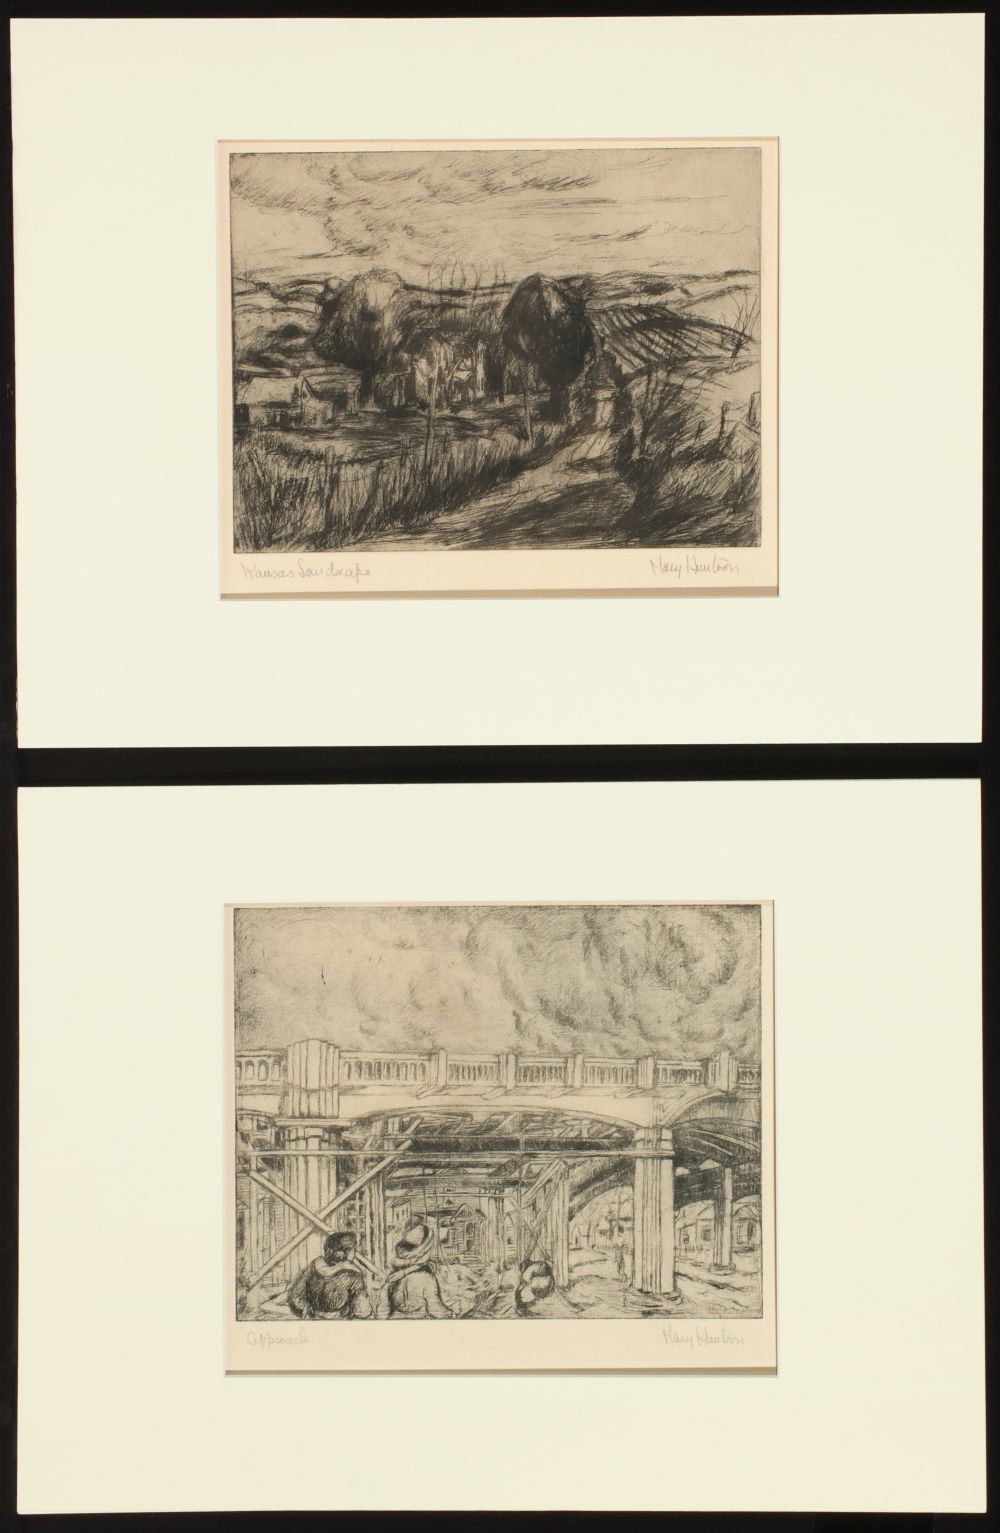 MARY HUNTOON (1896-1970) PENCIL SIGNED ETCHINGS